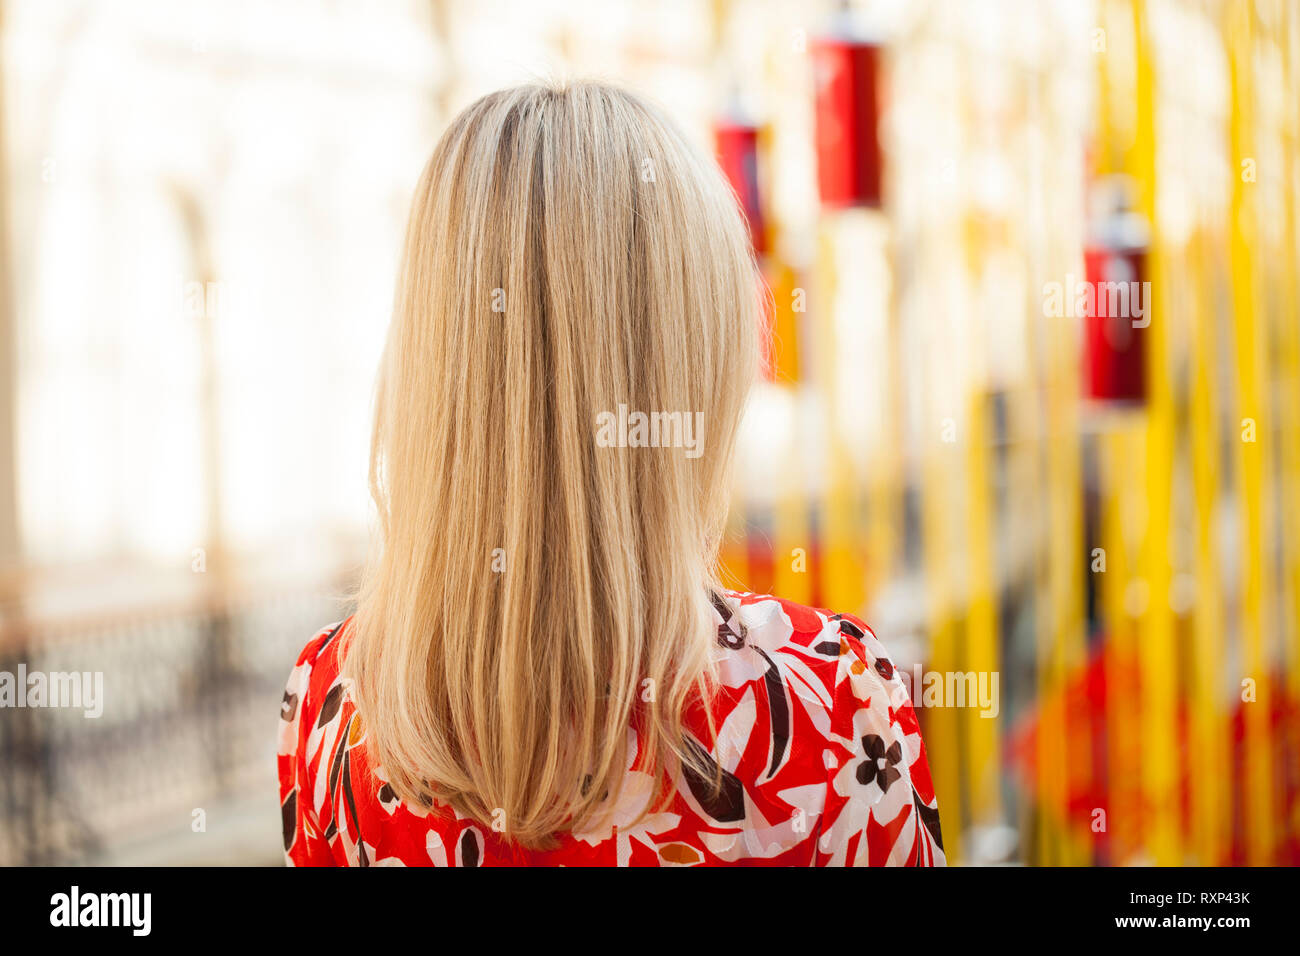 Rear view of blonde woman with hair in ponytail - wide 5